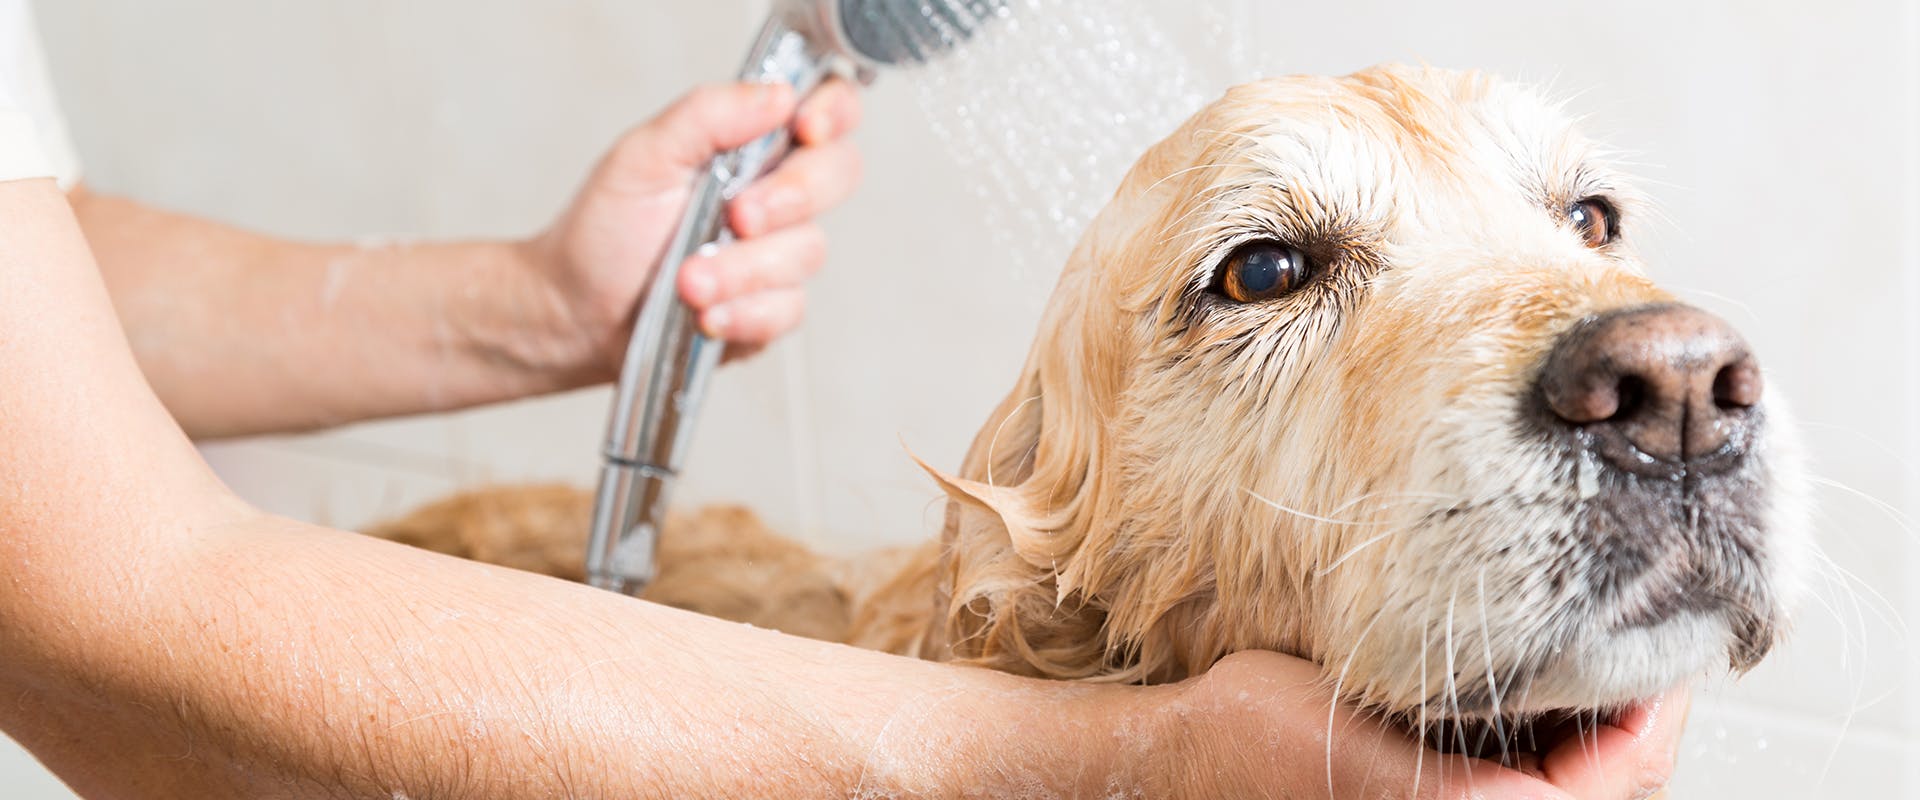 A dog having a shower, a person holding a shower head over the dog's head